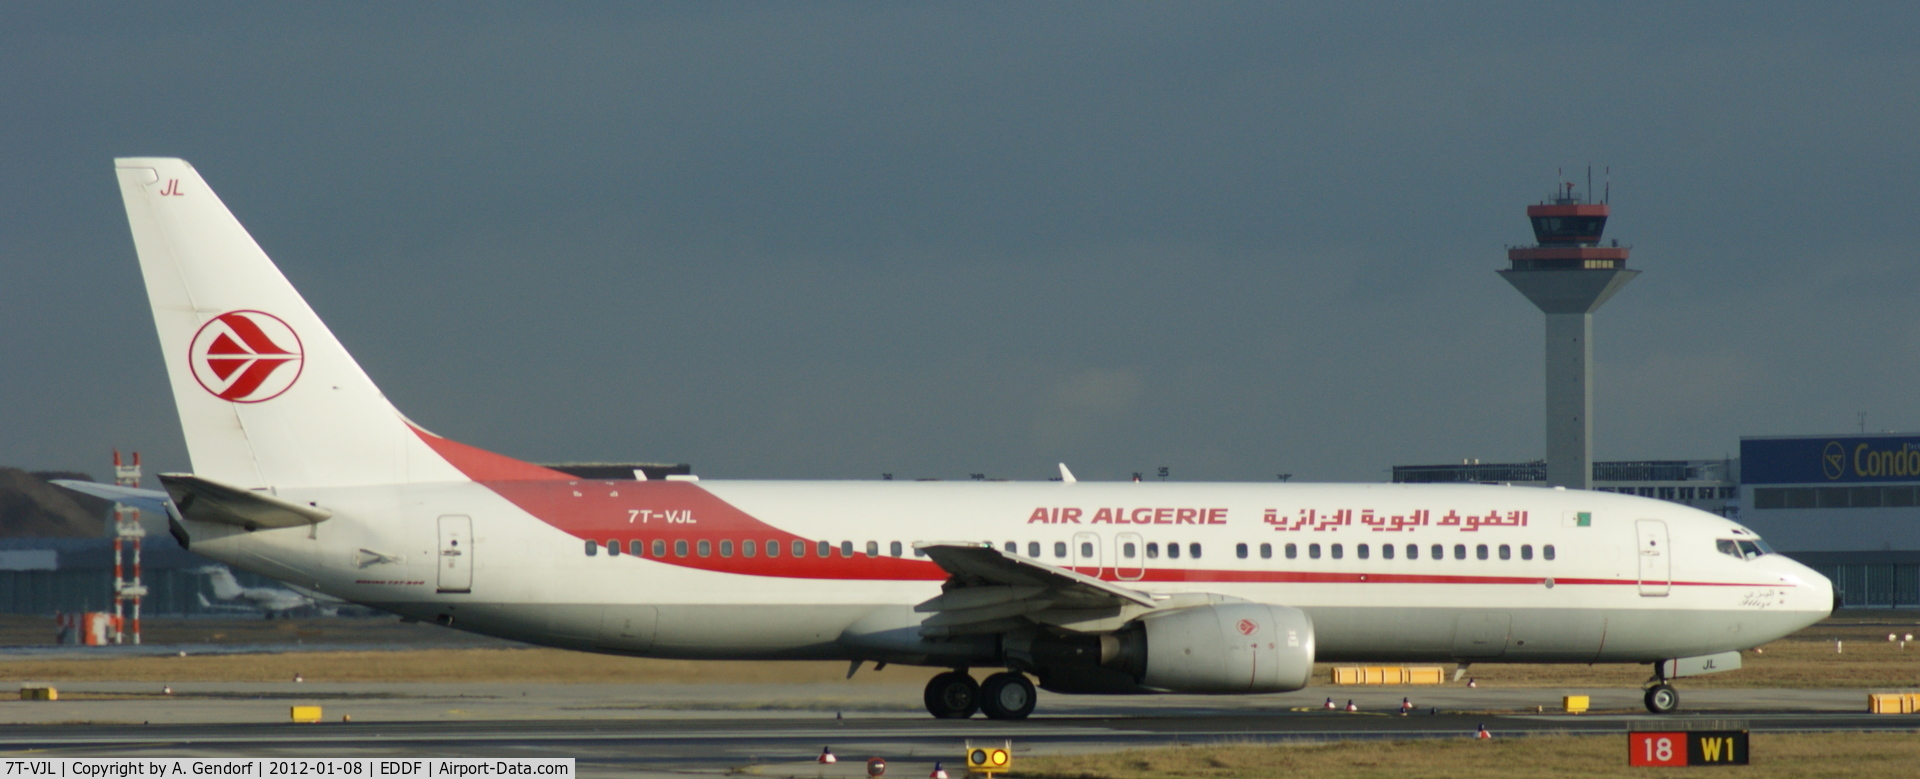 7T-VJL, 2000 Boeing 737-8D6 C/N 30204, Air Algerie, just waiting for take off clearence on runway 18 at Frankfurt Int´l (EDDF)